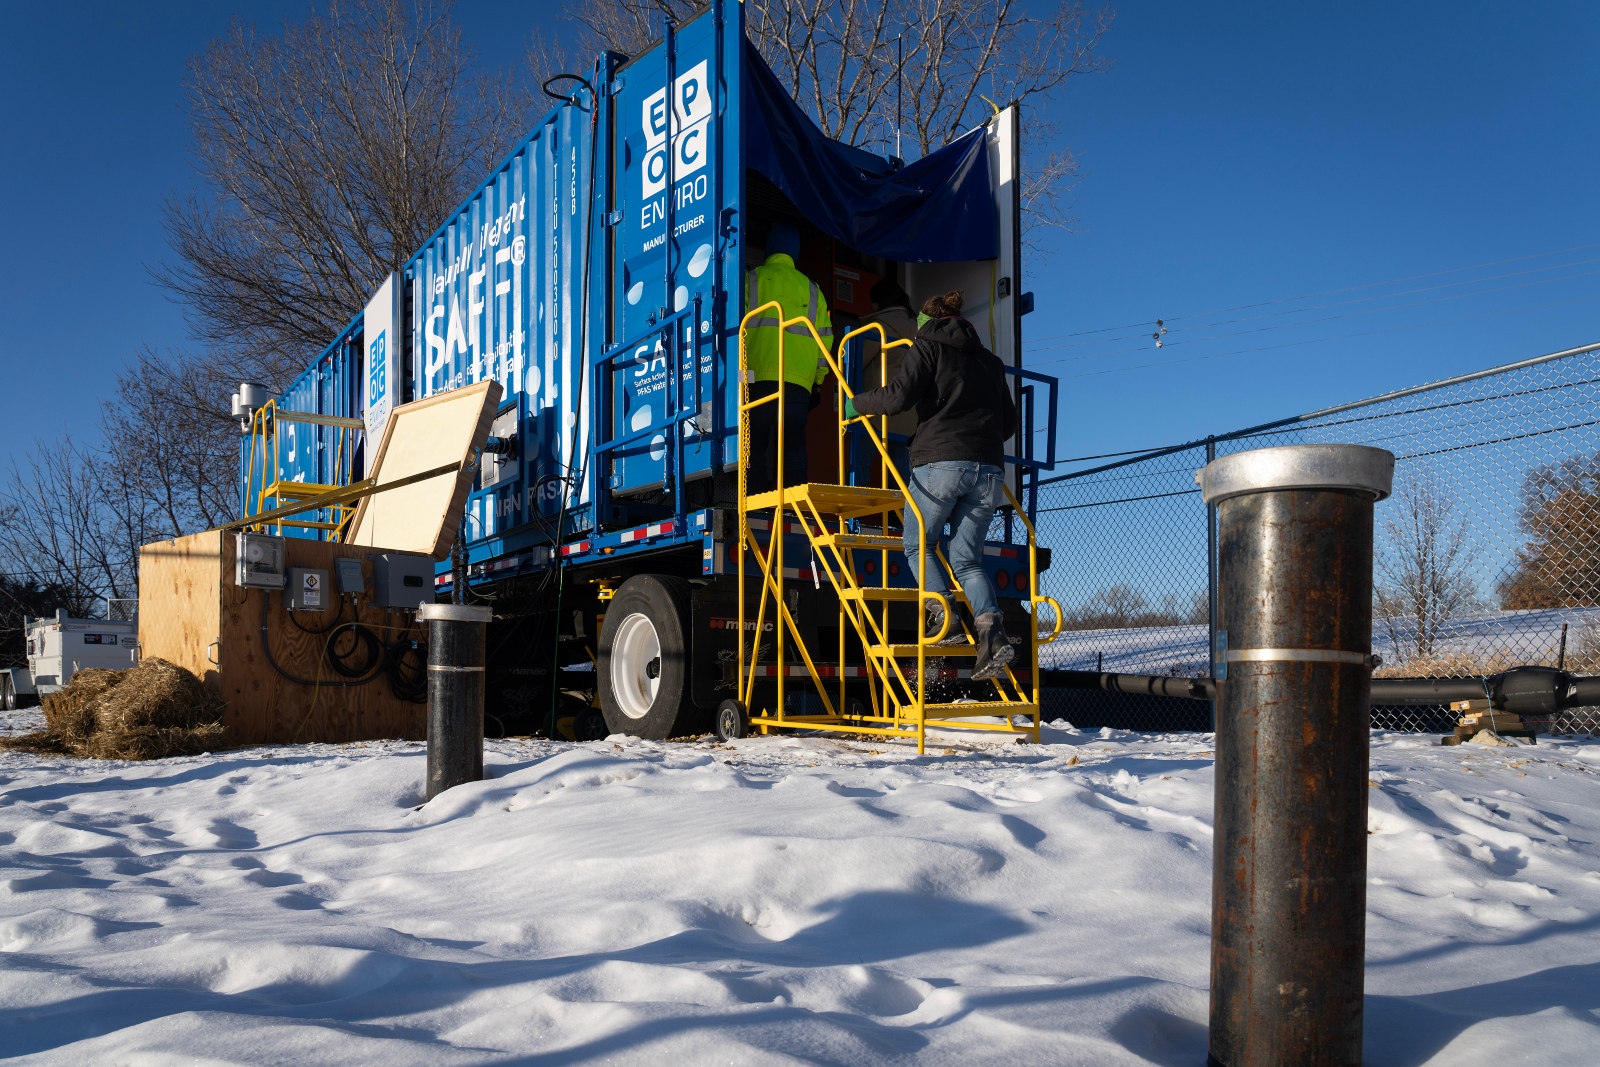 Parked on snowy ground, a blue trailer is open in the back, with two people climbing in through a yellow stepladder